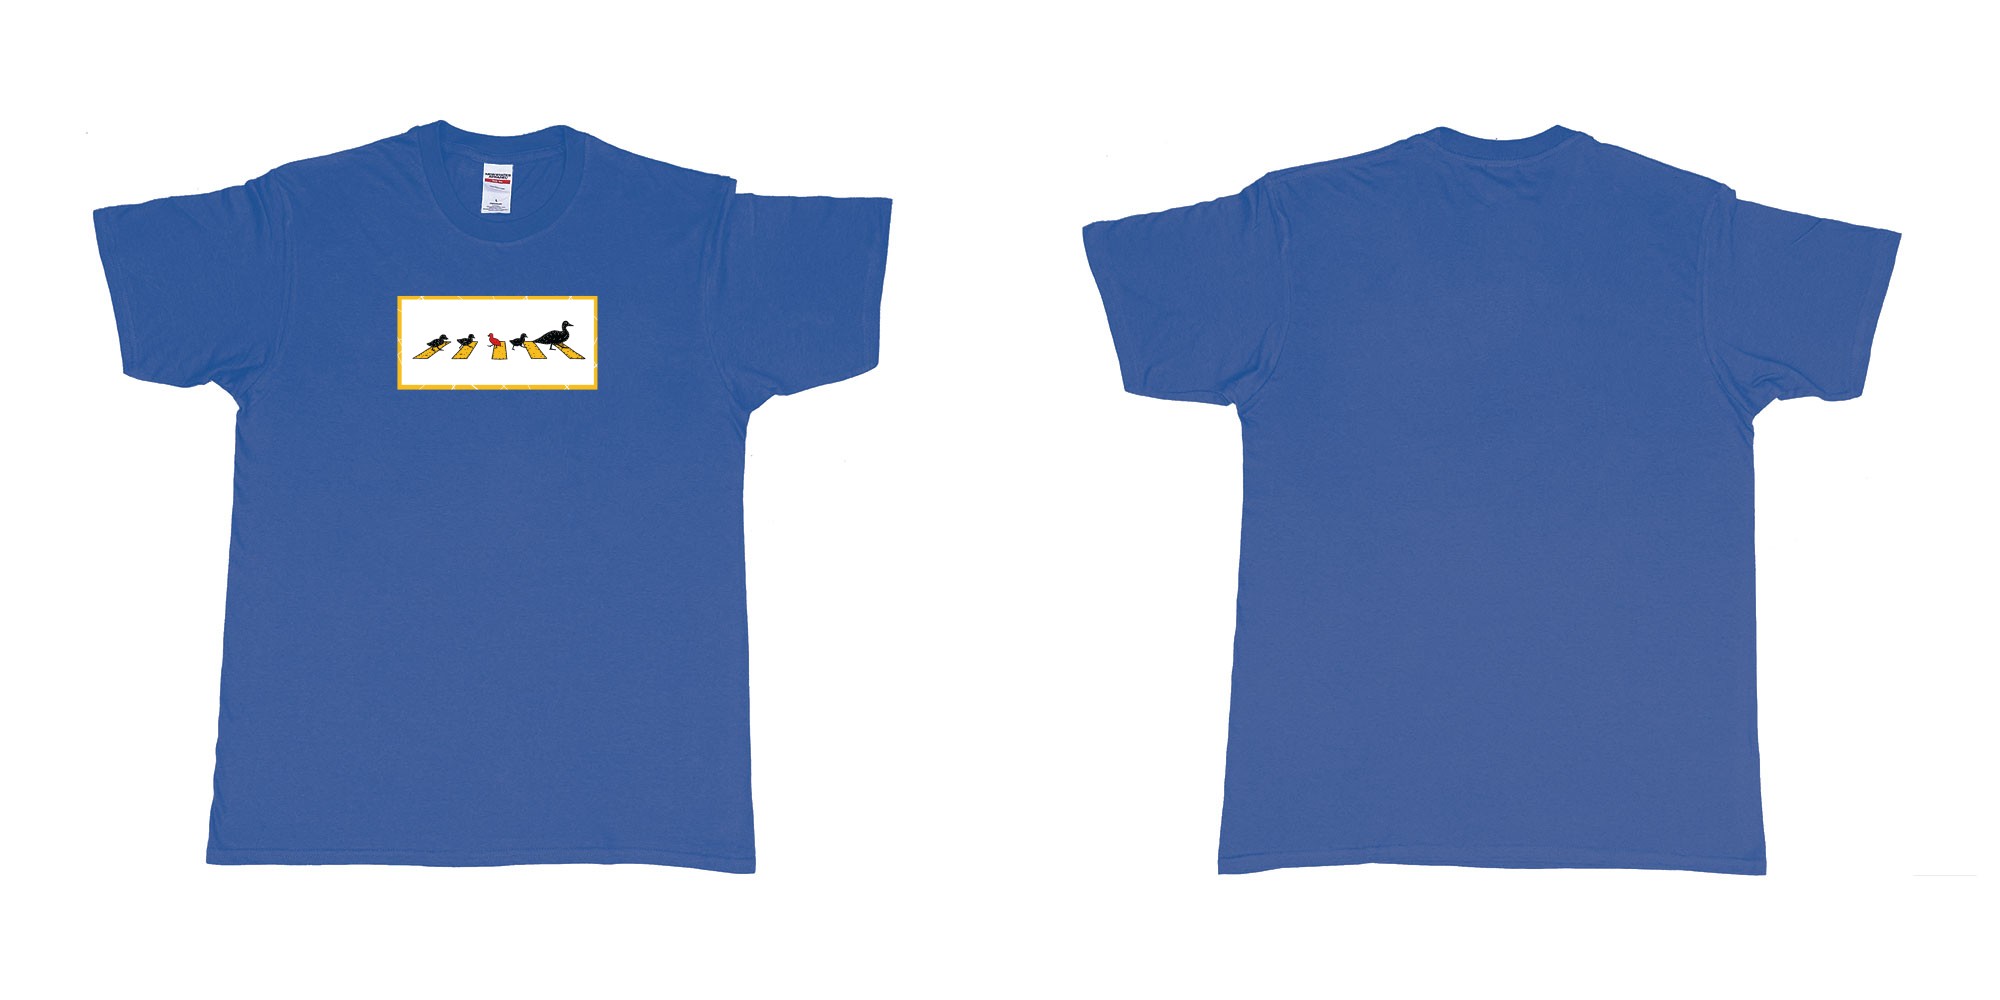 Custom tshirt design 4481 ducks in fabric color royal-blue choice your own text made in Bali by The Pirate Way